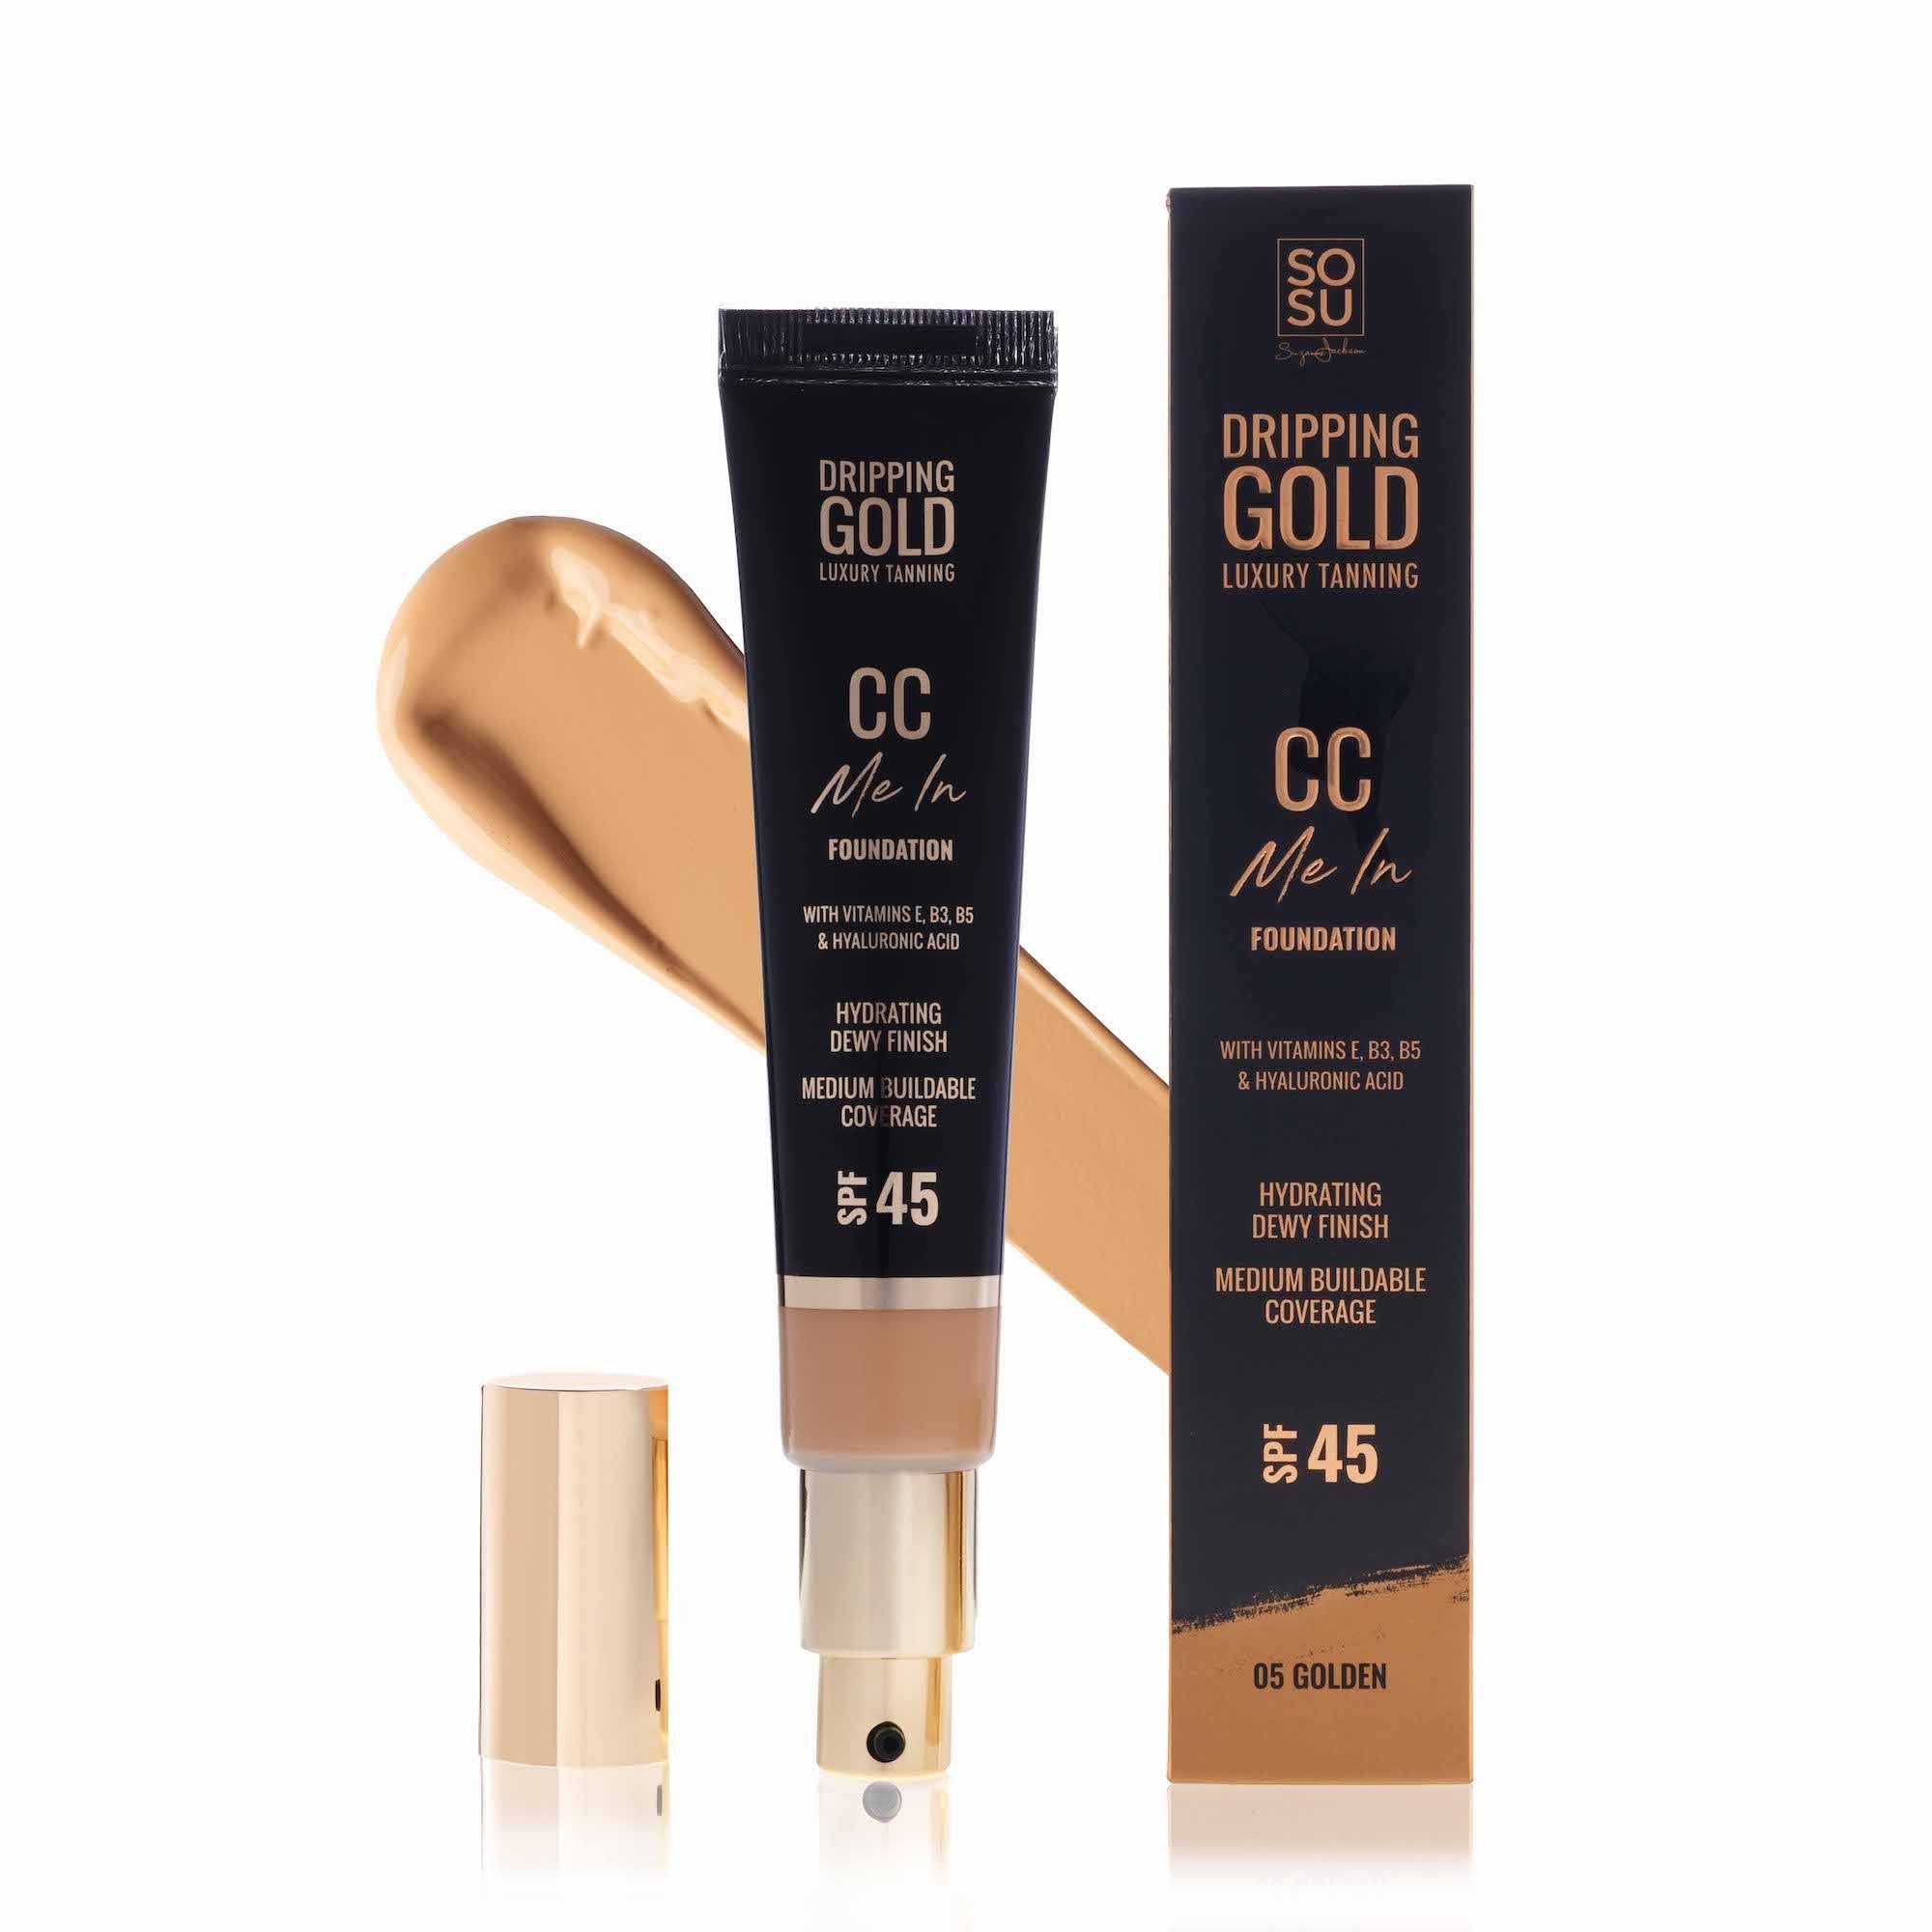 Dripping Gold CC Me in Foundation SPF4505 Golden